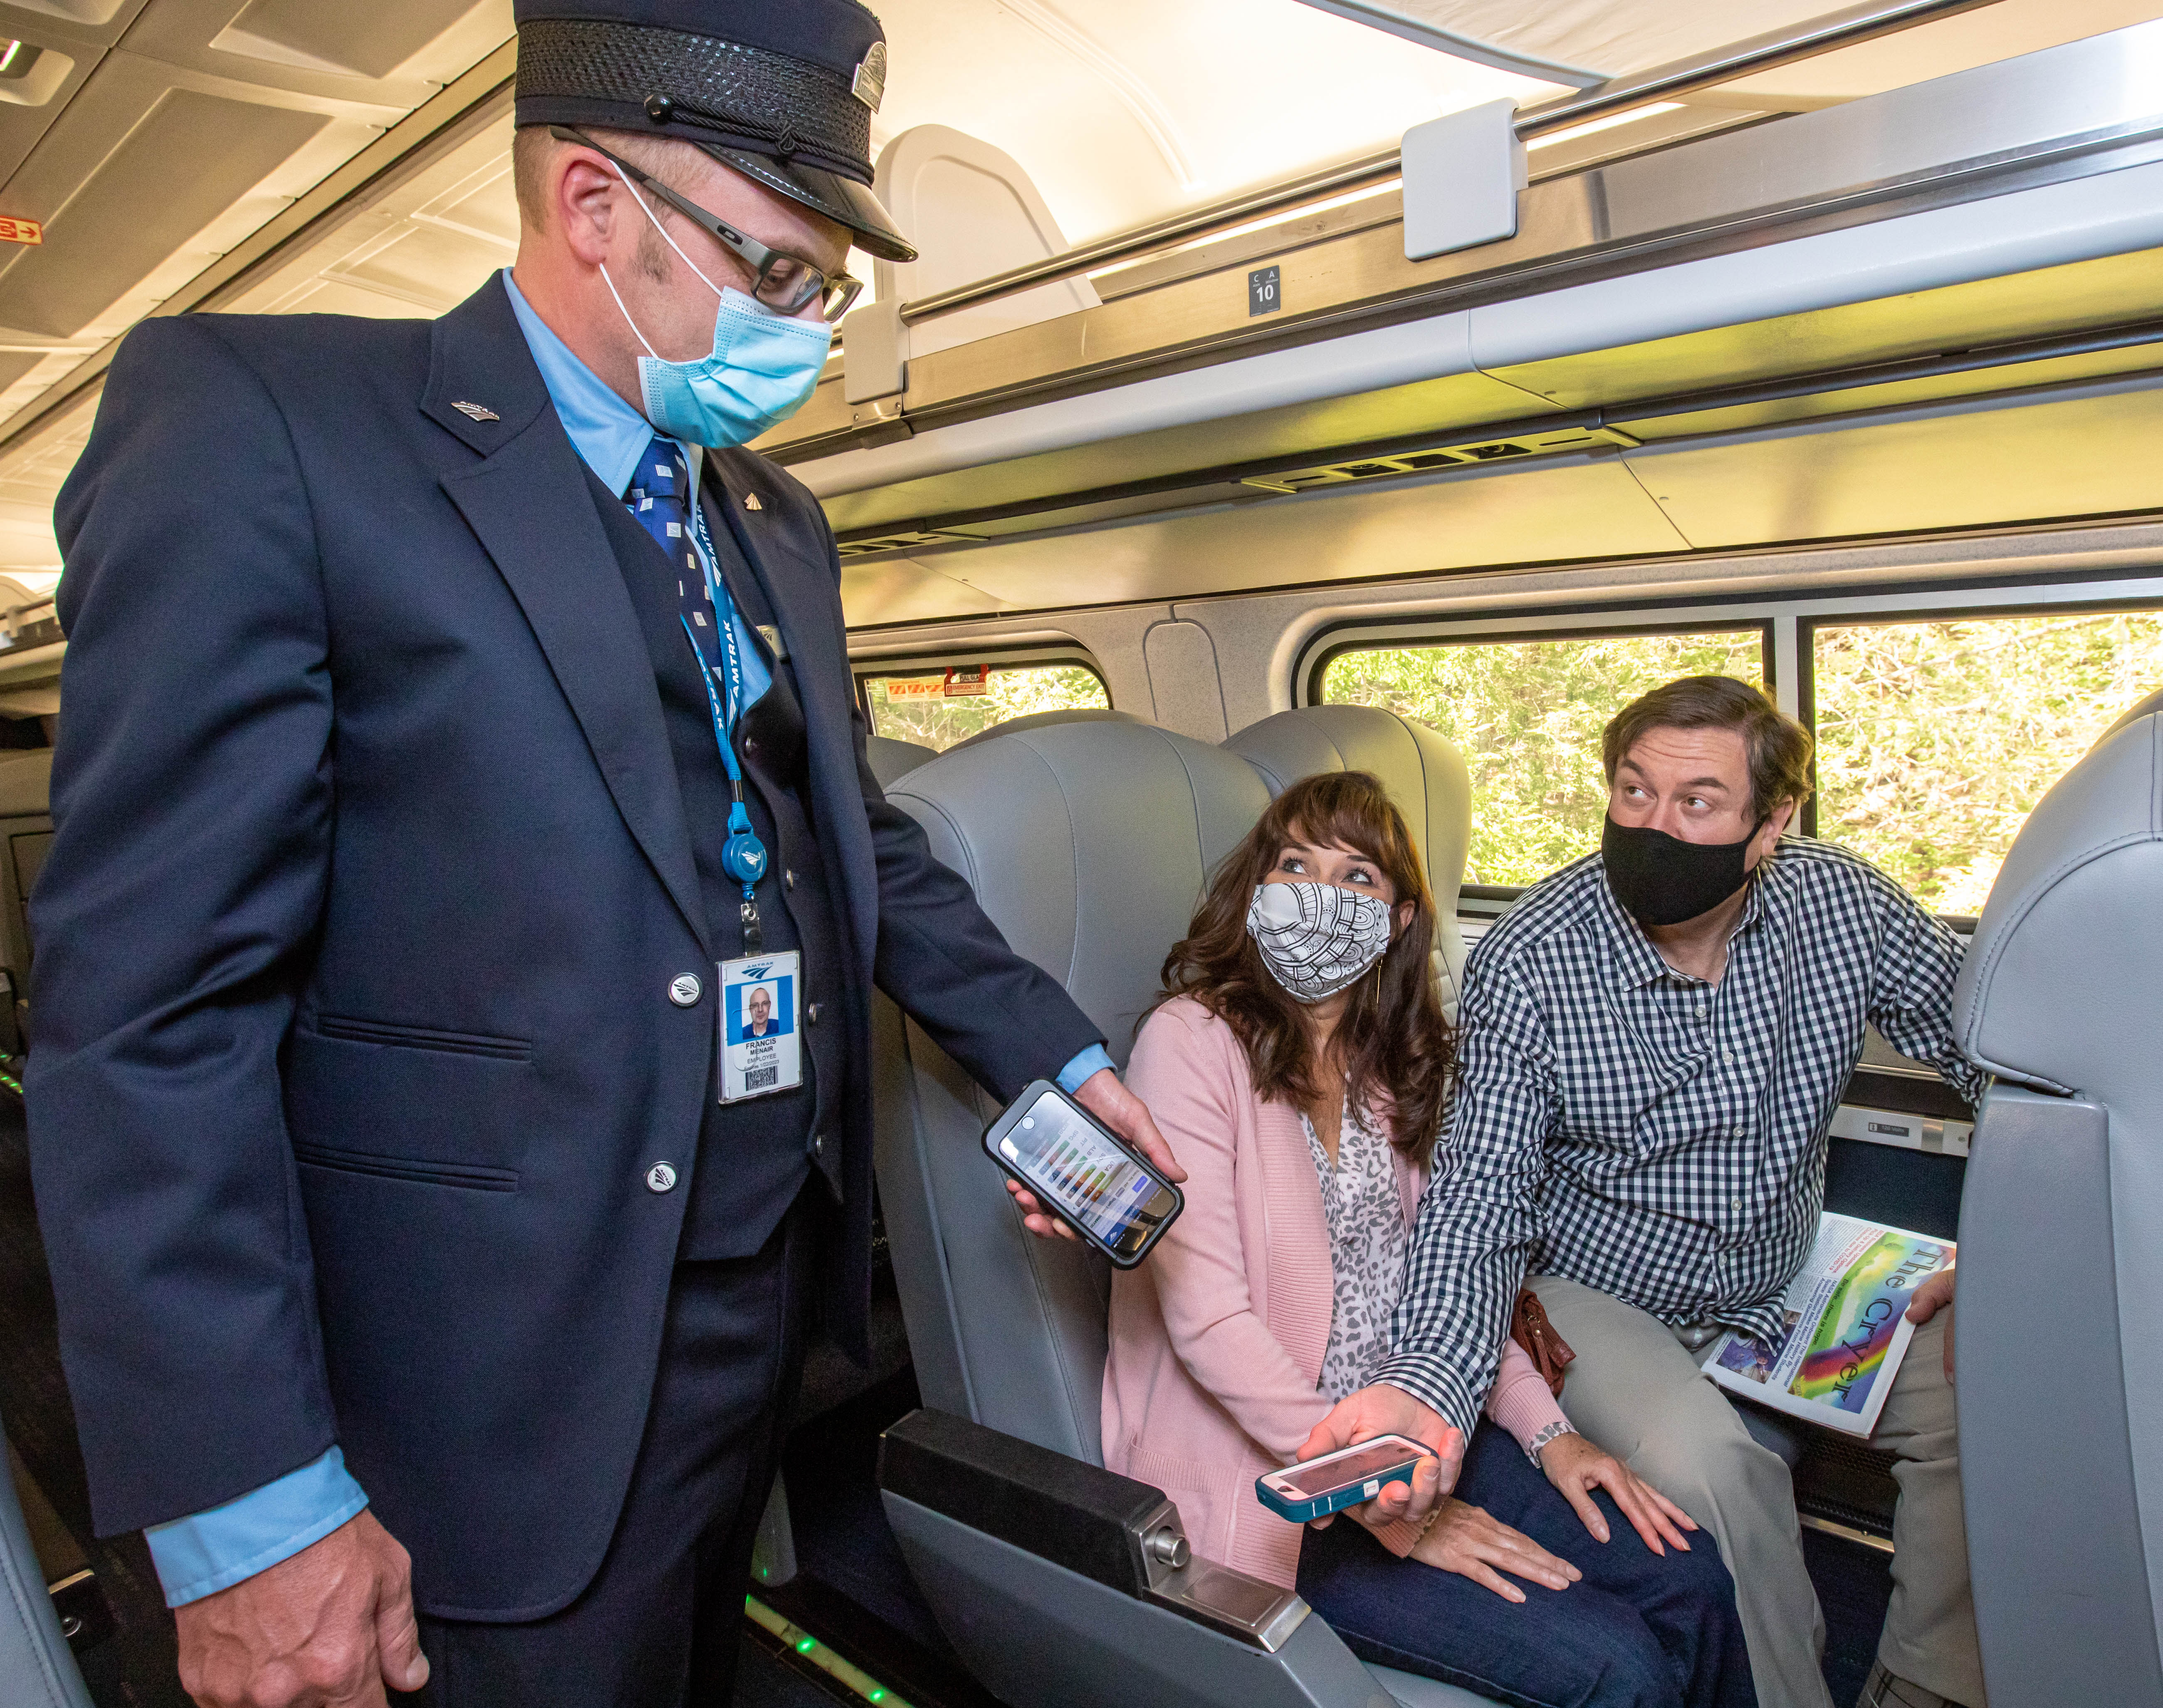 Amtrak Social Distancing Couple onboard with Conductor Masks1 